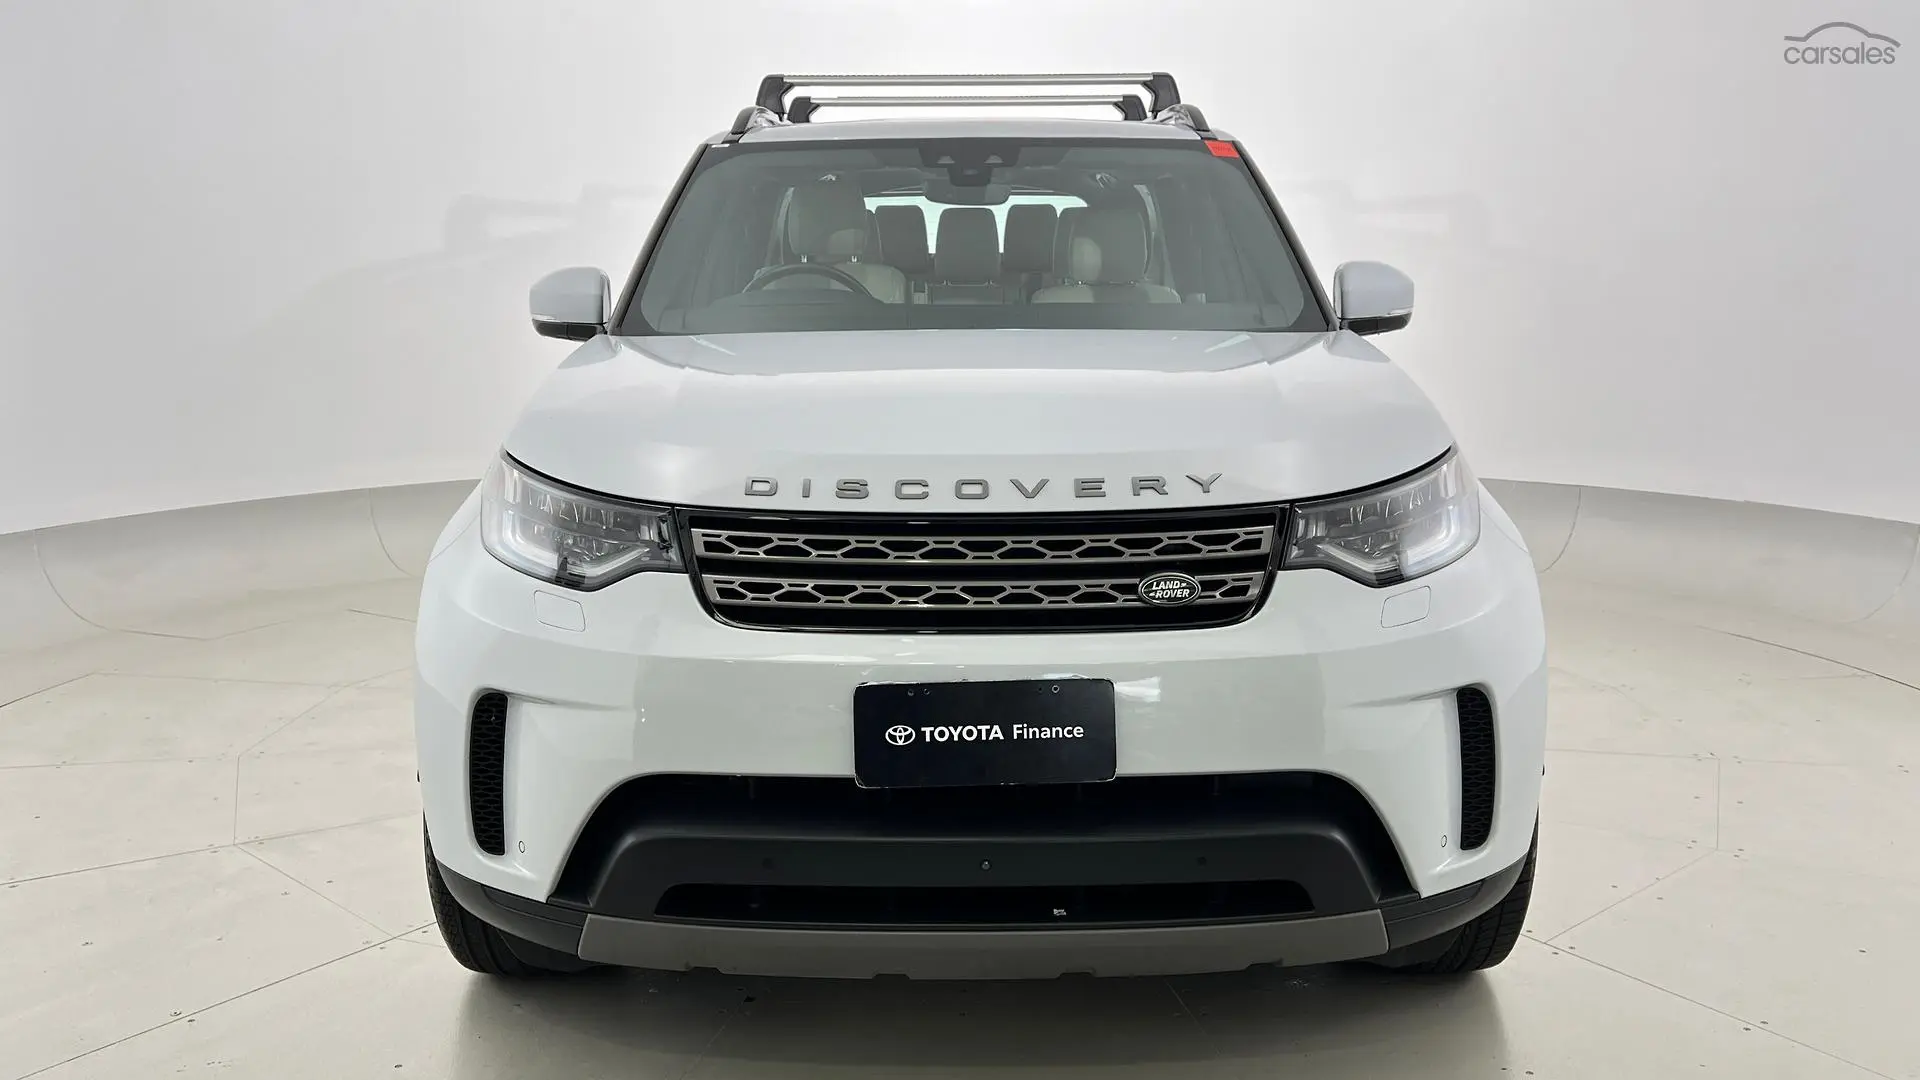 2019 Land Rover Discovery Image 3